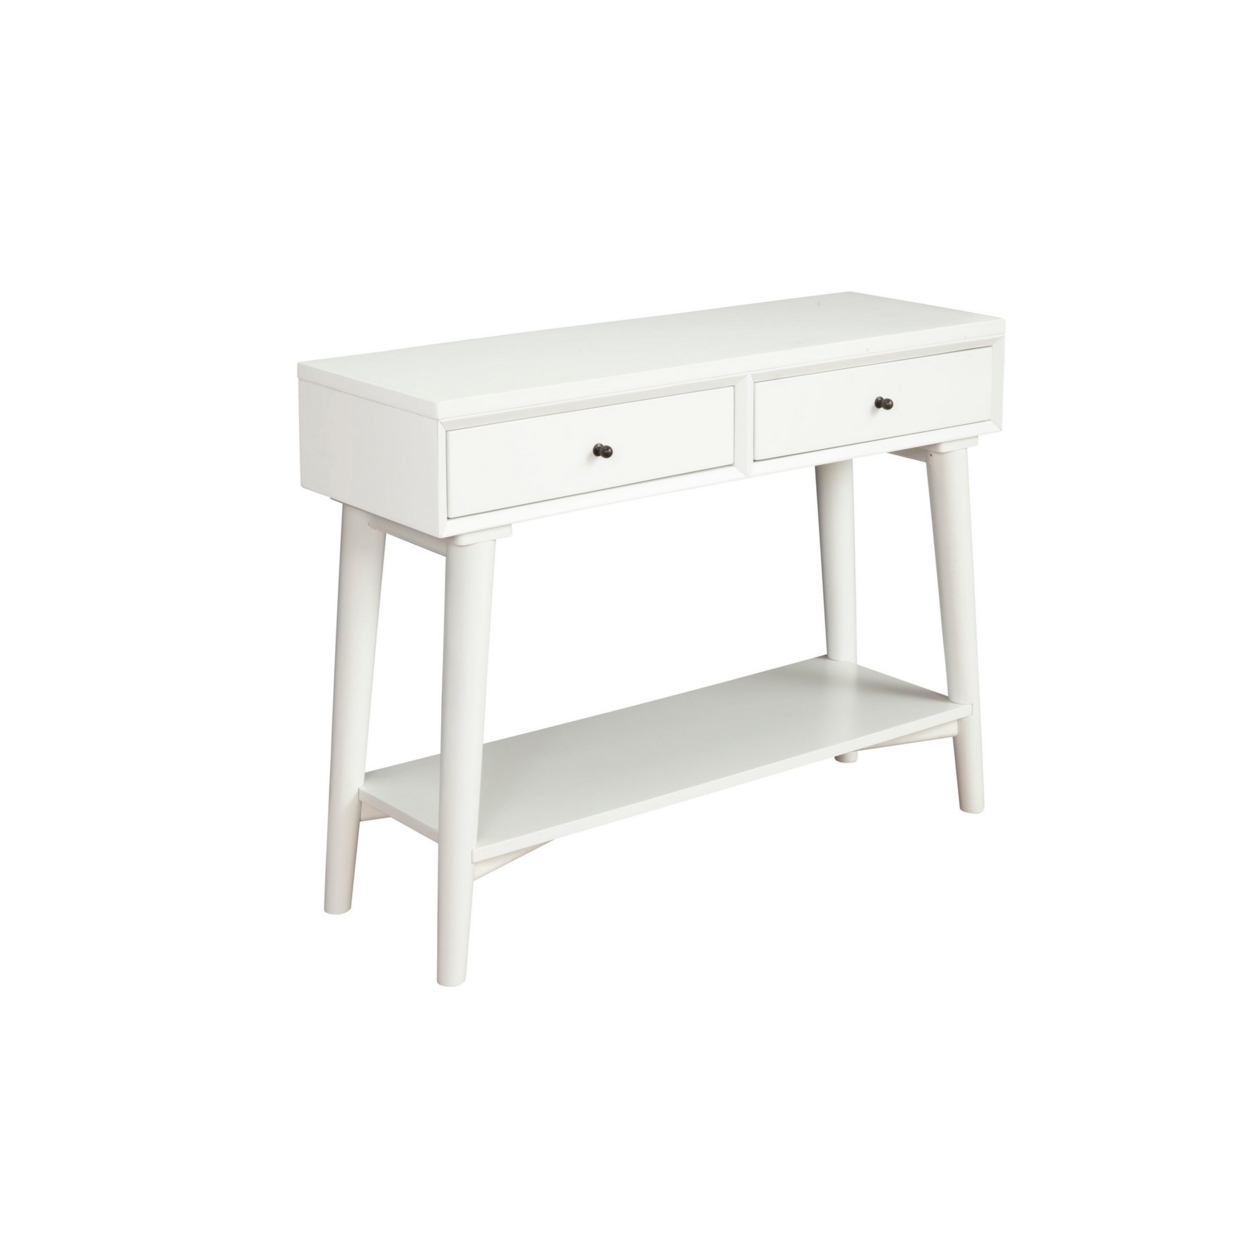 Console Table With 2 Drawers And Angled Legs, White- Saltoro Sherpi